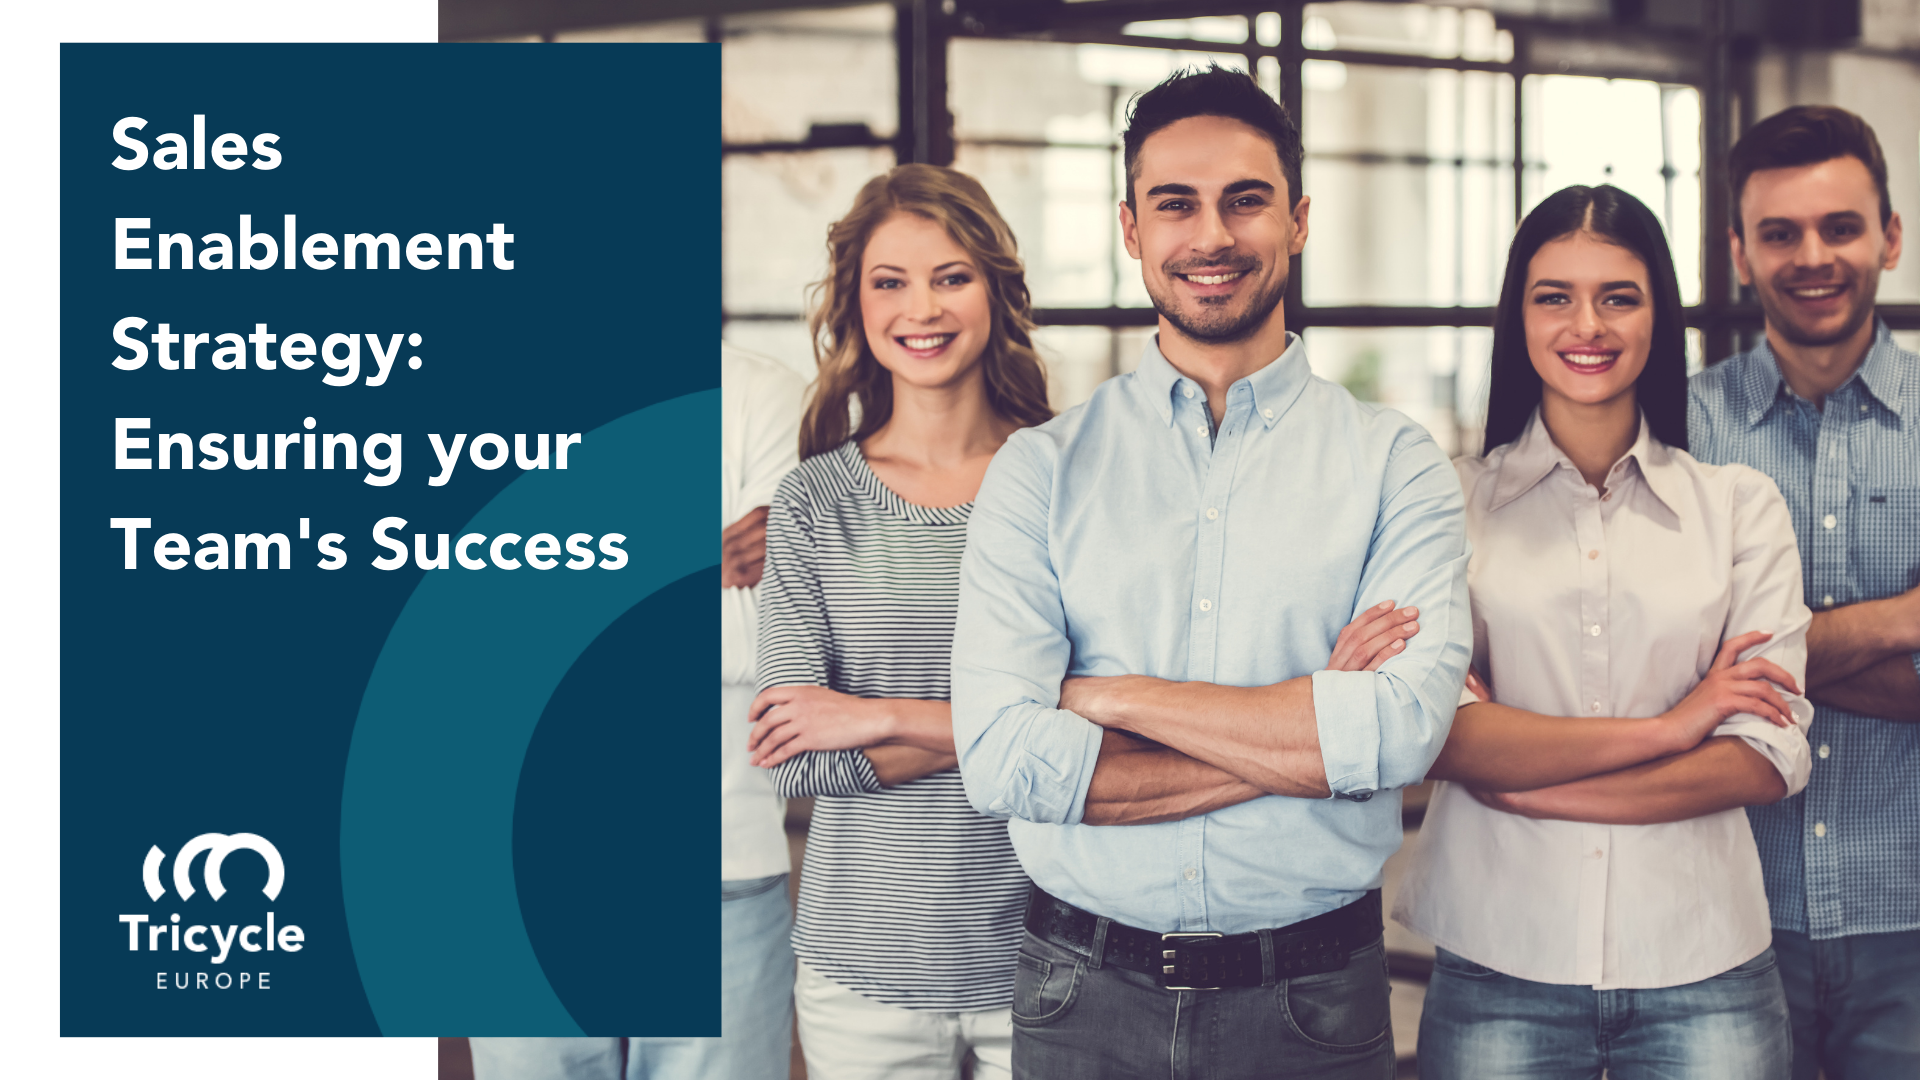 Sales Enablement Strategy: Ensuring your Team’s Success